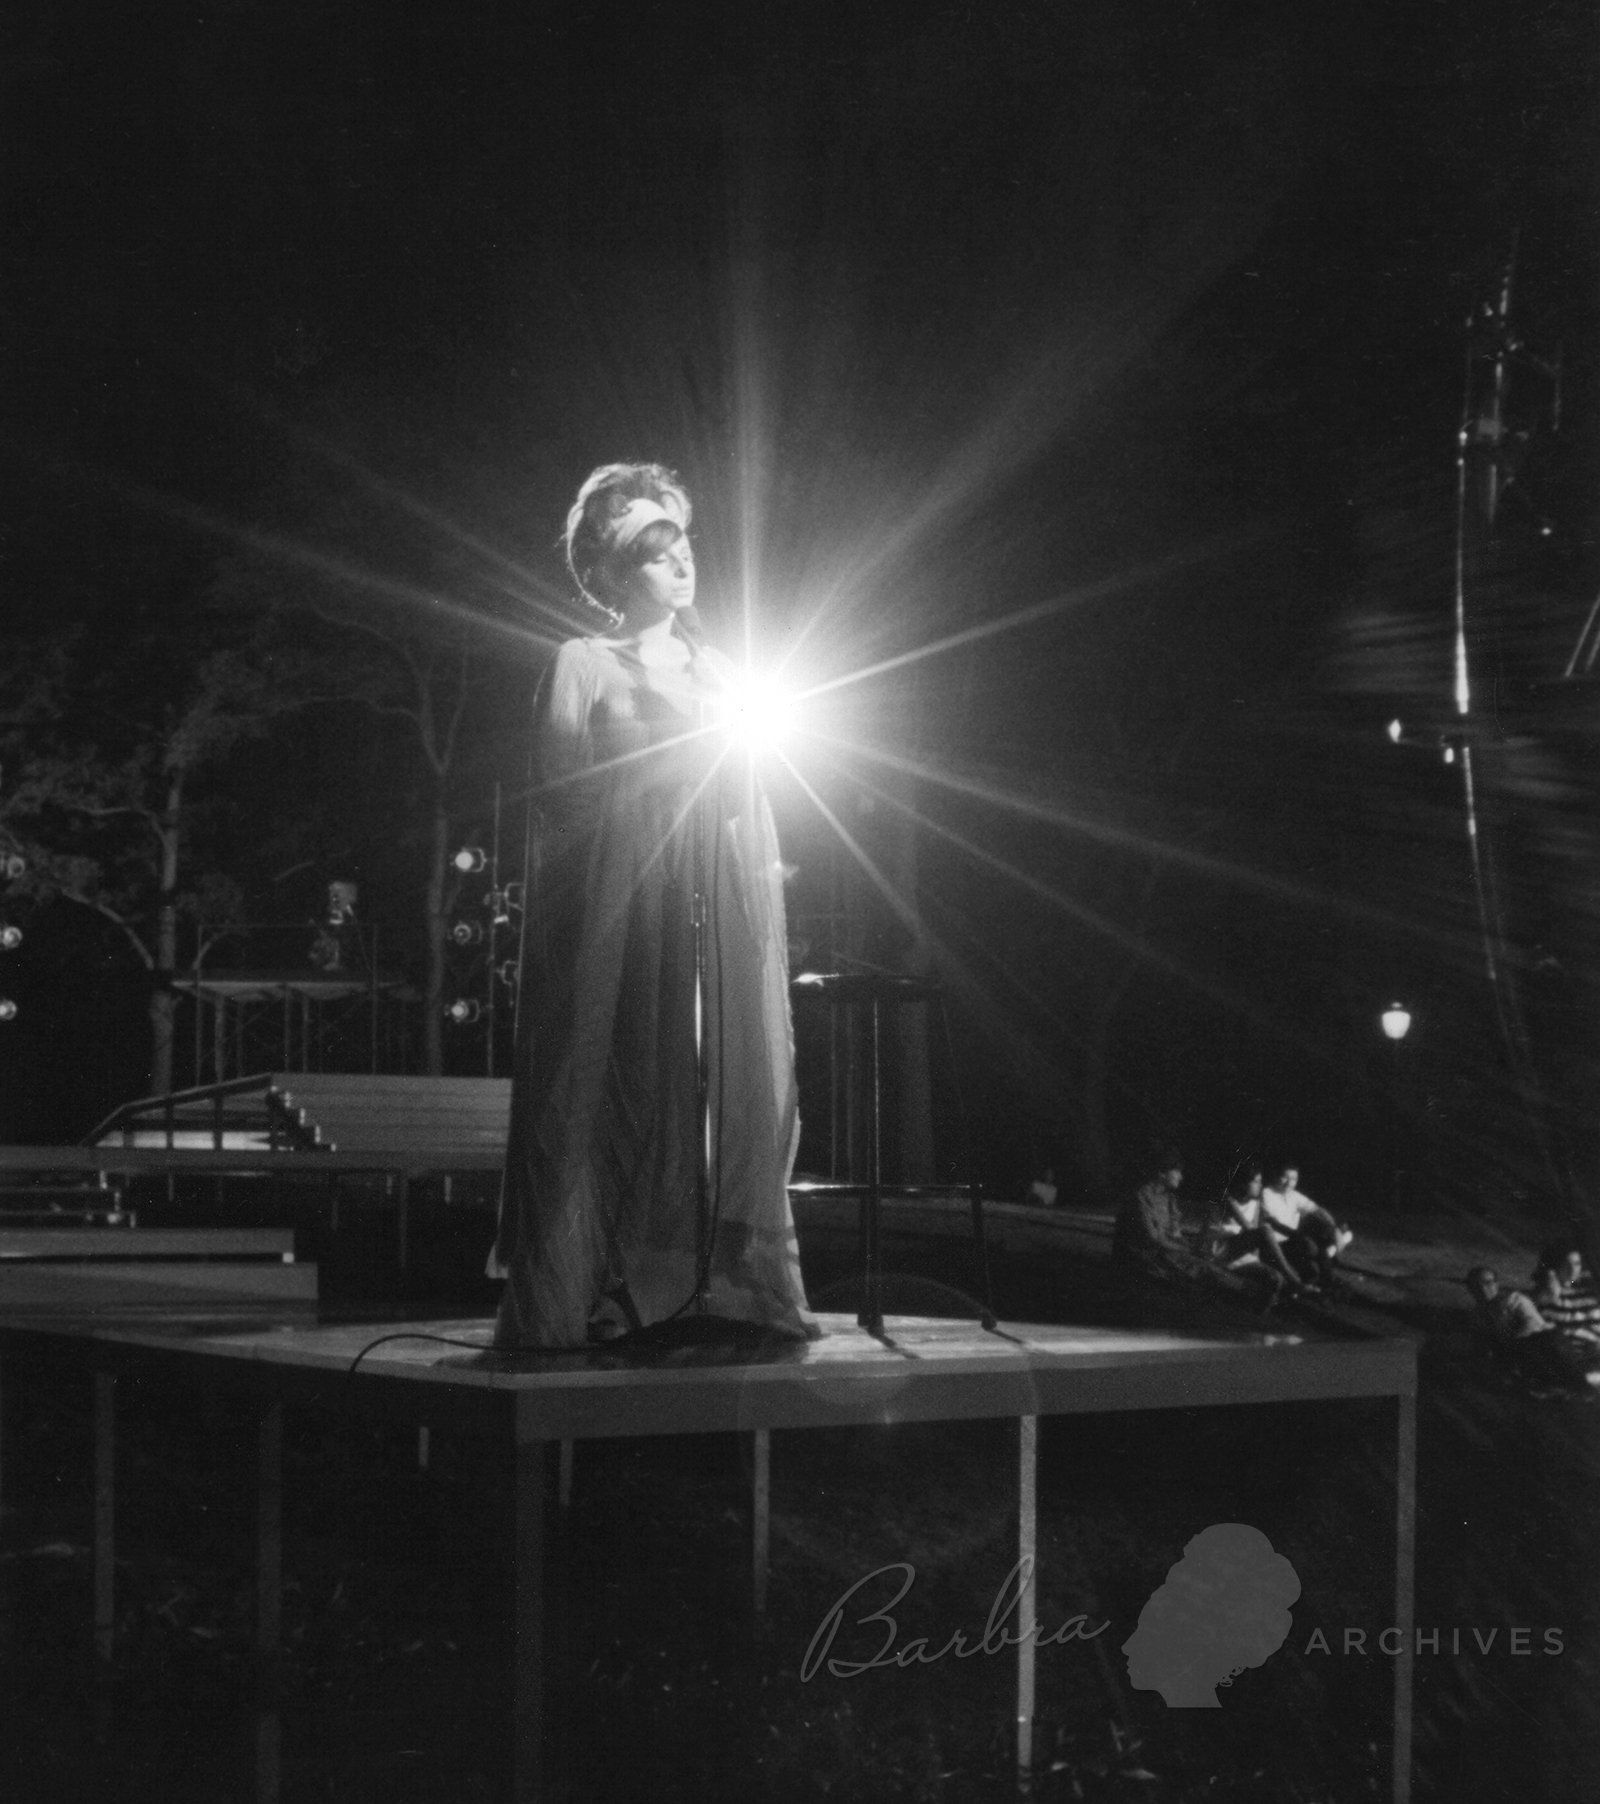 Original, unedited photo of Streisand at Central Park concert rehearsal which was used for the cover of A Christmas Album.